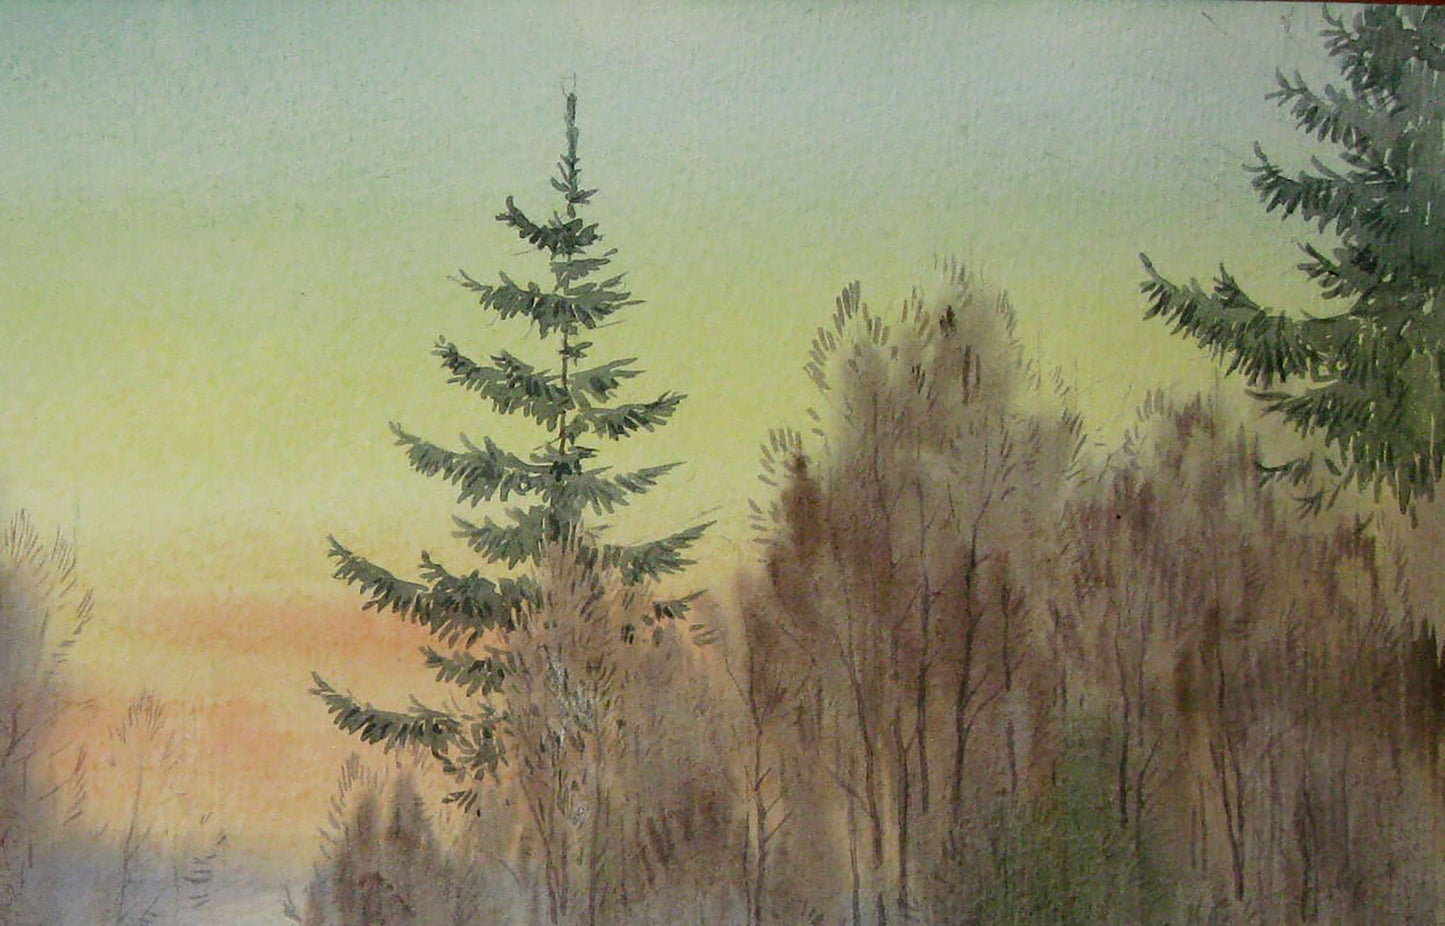 Watercolor painting Rest in the forest Savenets Valery